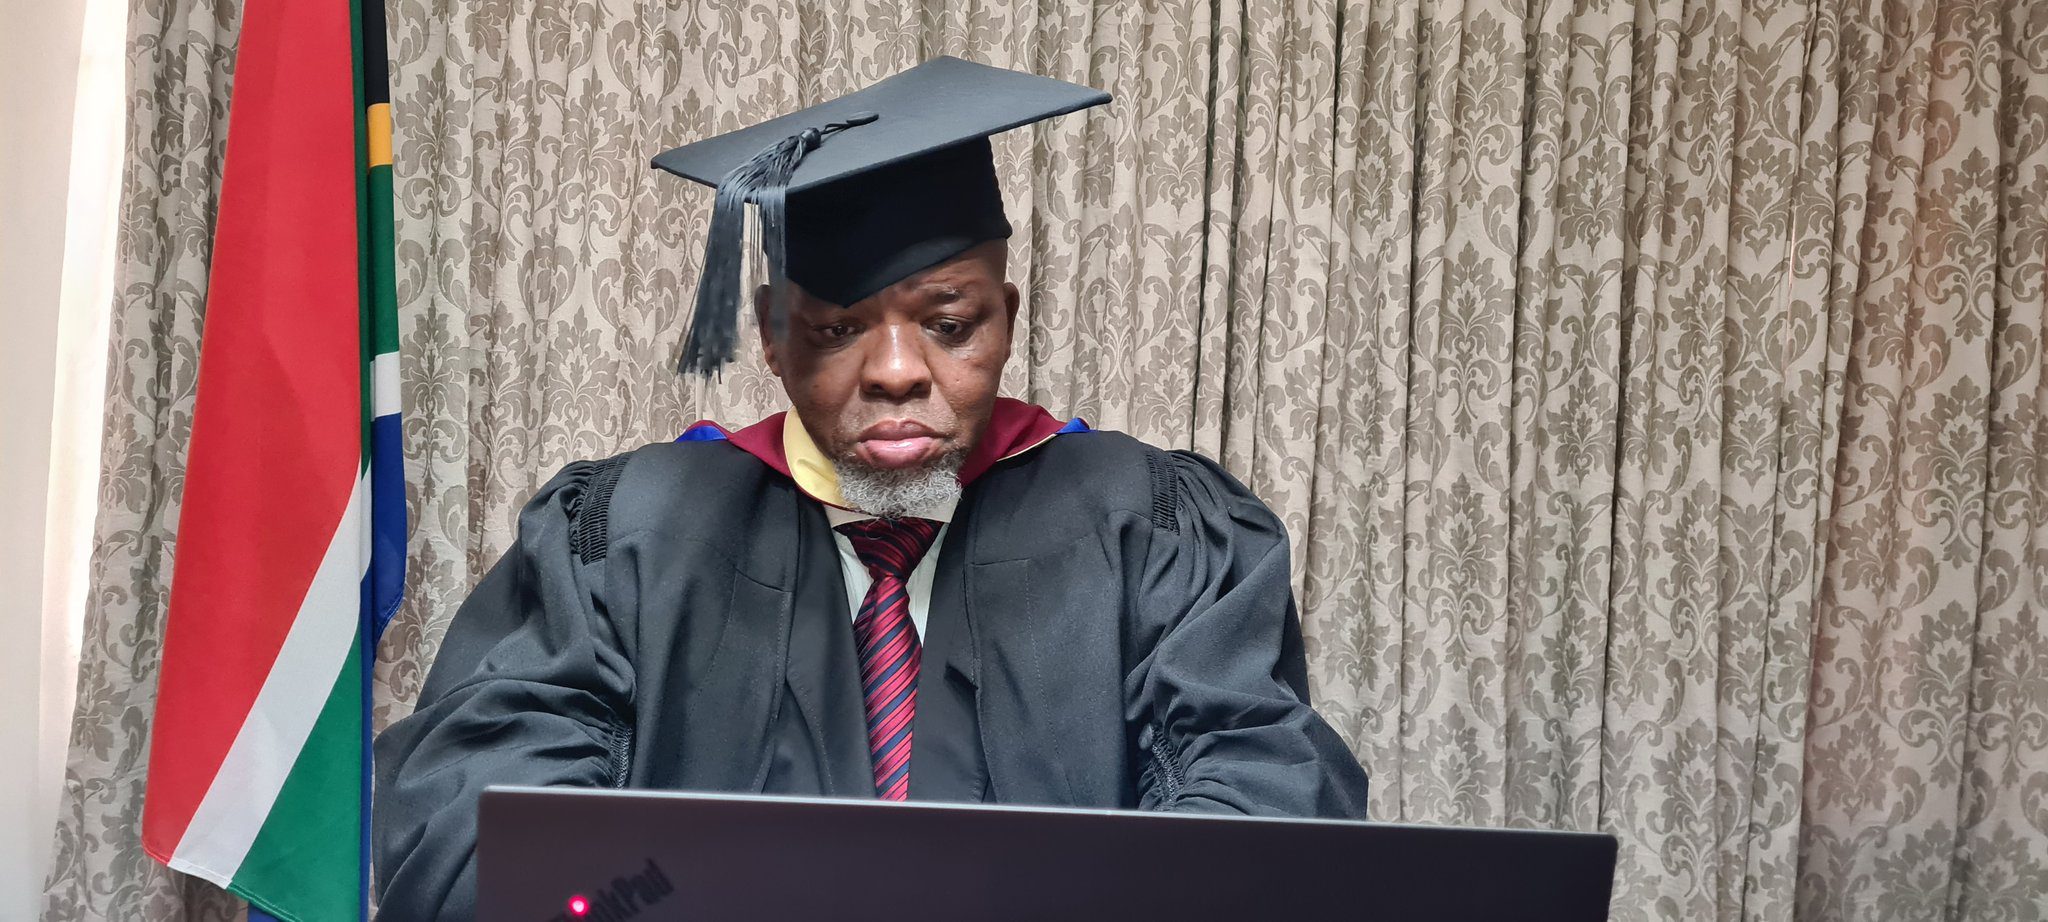 Master’s degree graduate, Gwede Mantashe encourages young people to study